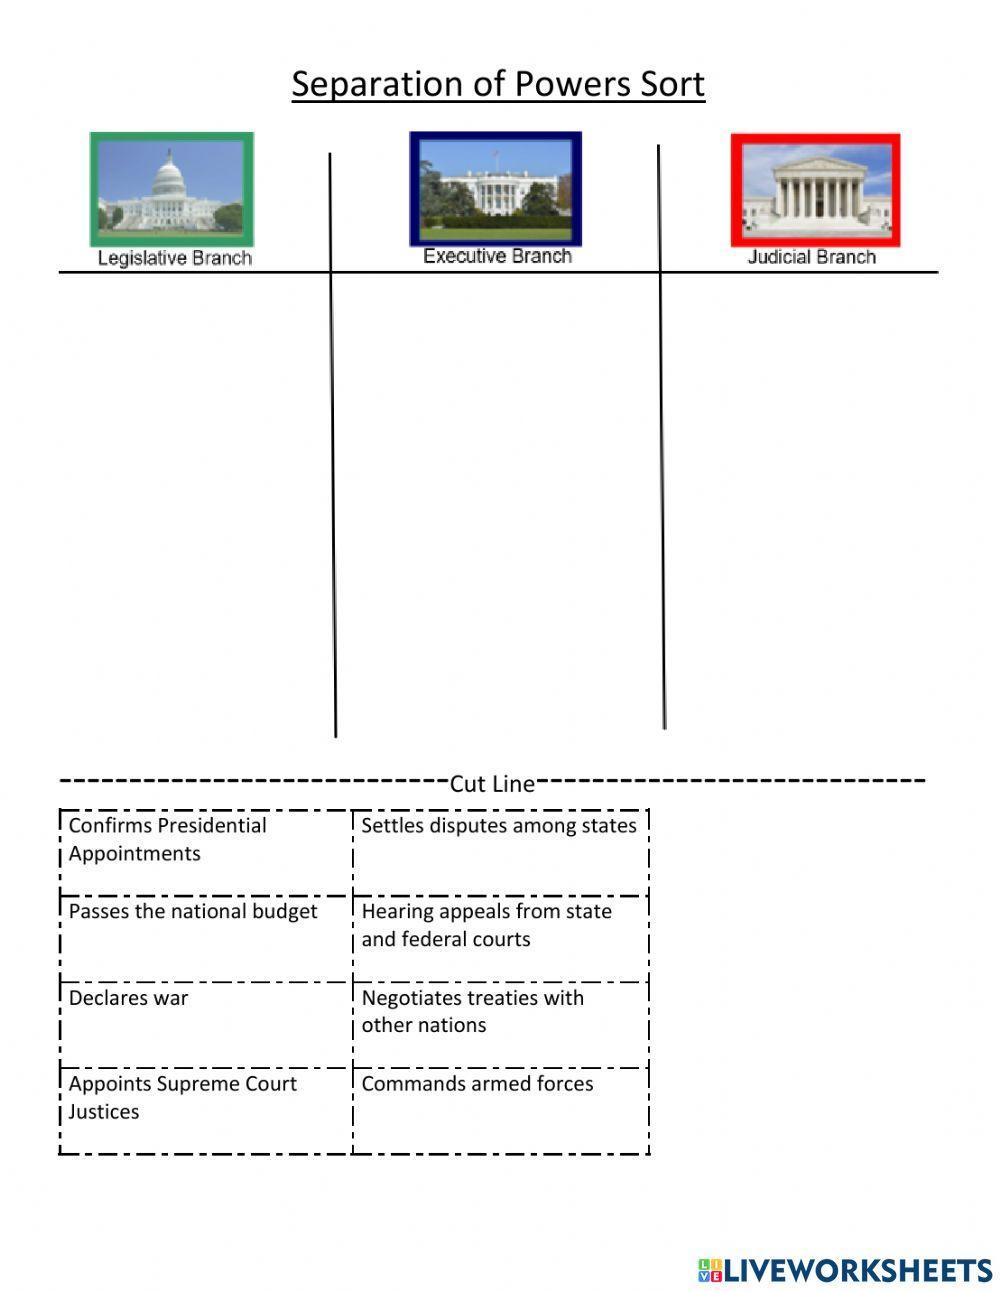 Separation of Powers Sort w text only